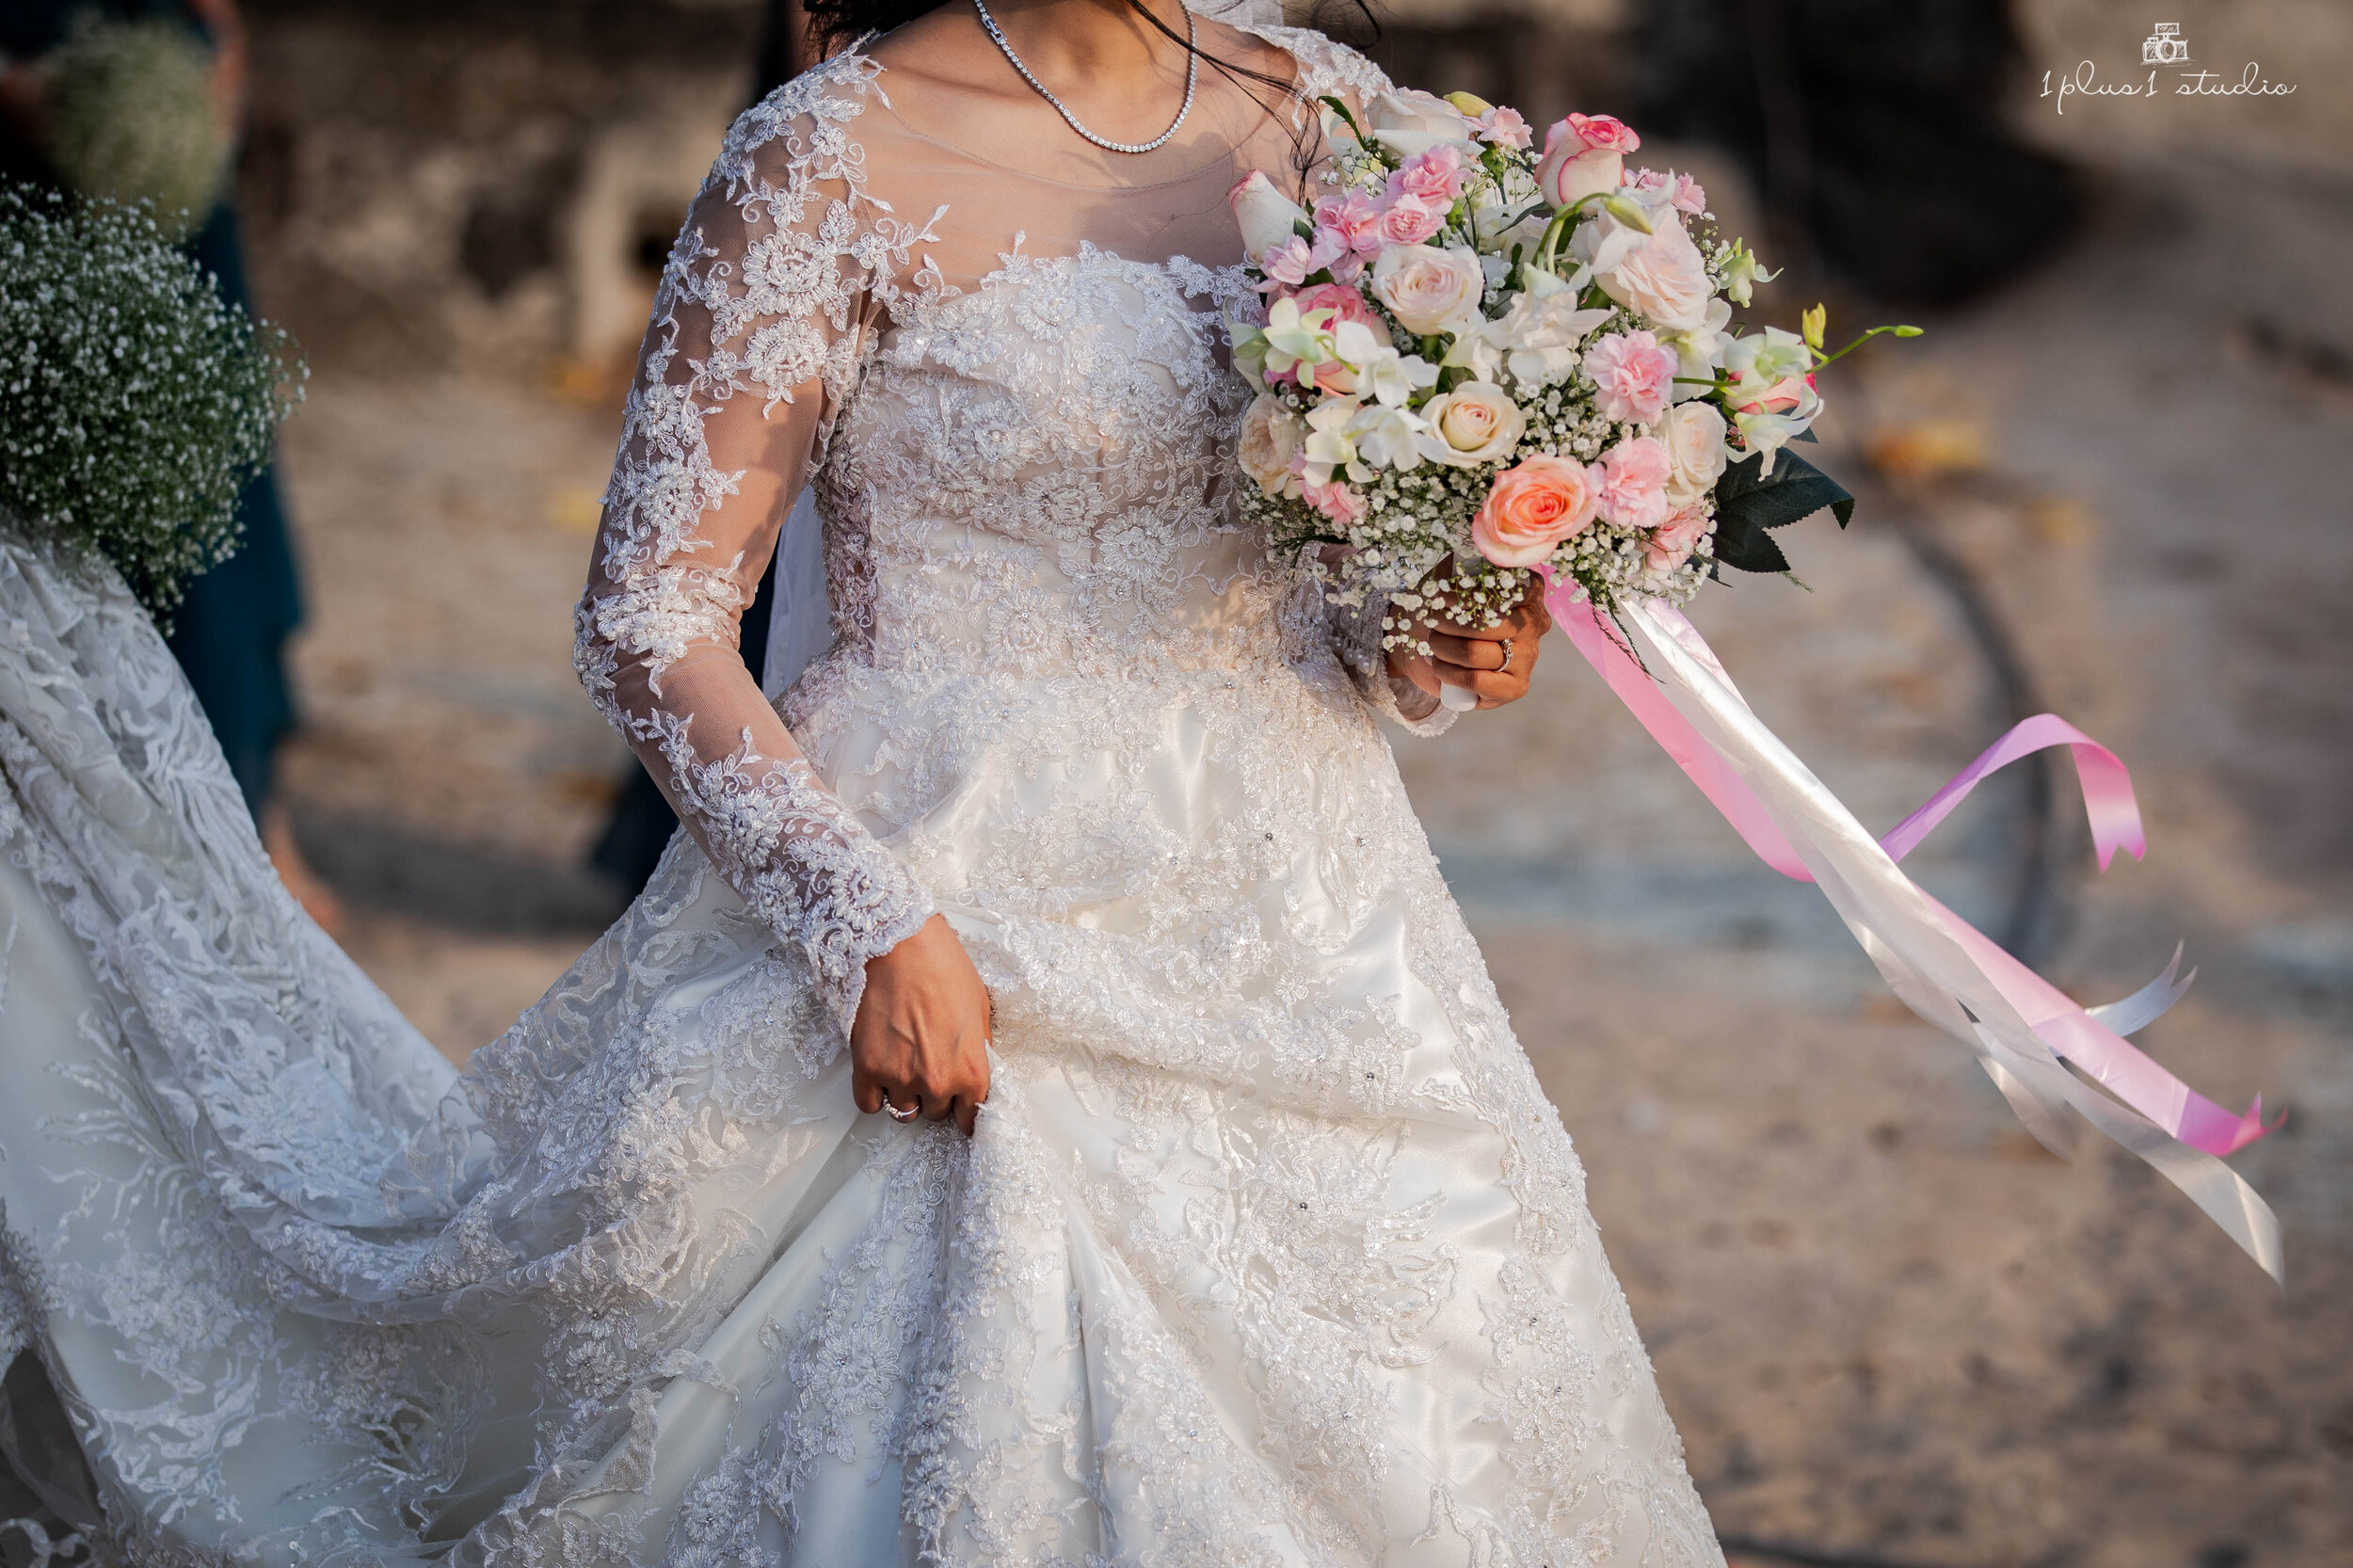 HELEN'S BEAUTIFUL BRIDES BRIDAL GOWNS; Mumbai - Your Dream Wedding or  Communion Gown is just a call away You Rent it or Own it! The Gorgeous look  is guaranteed Best Pricing Call